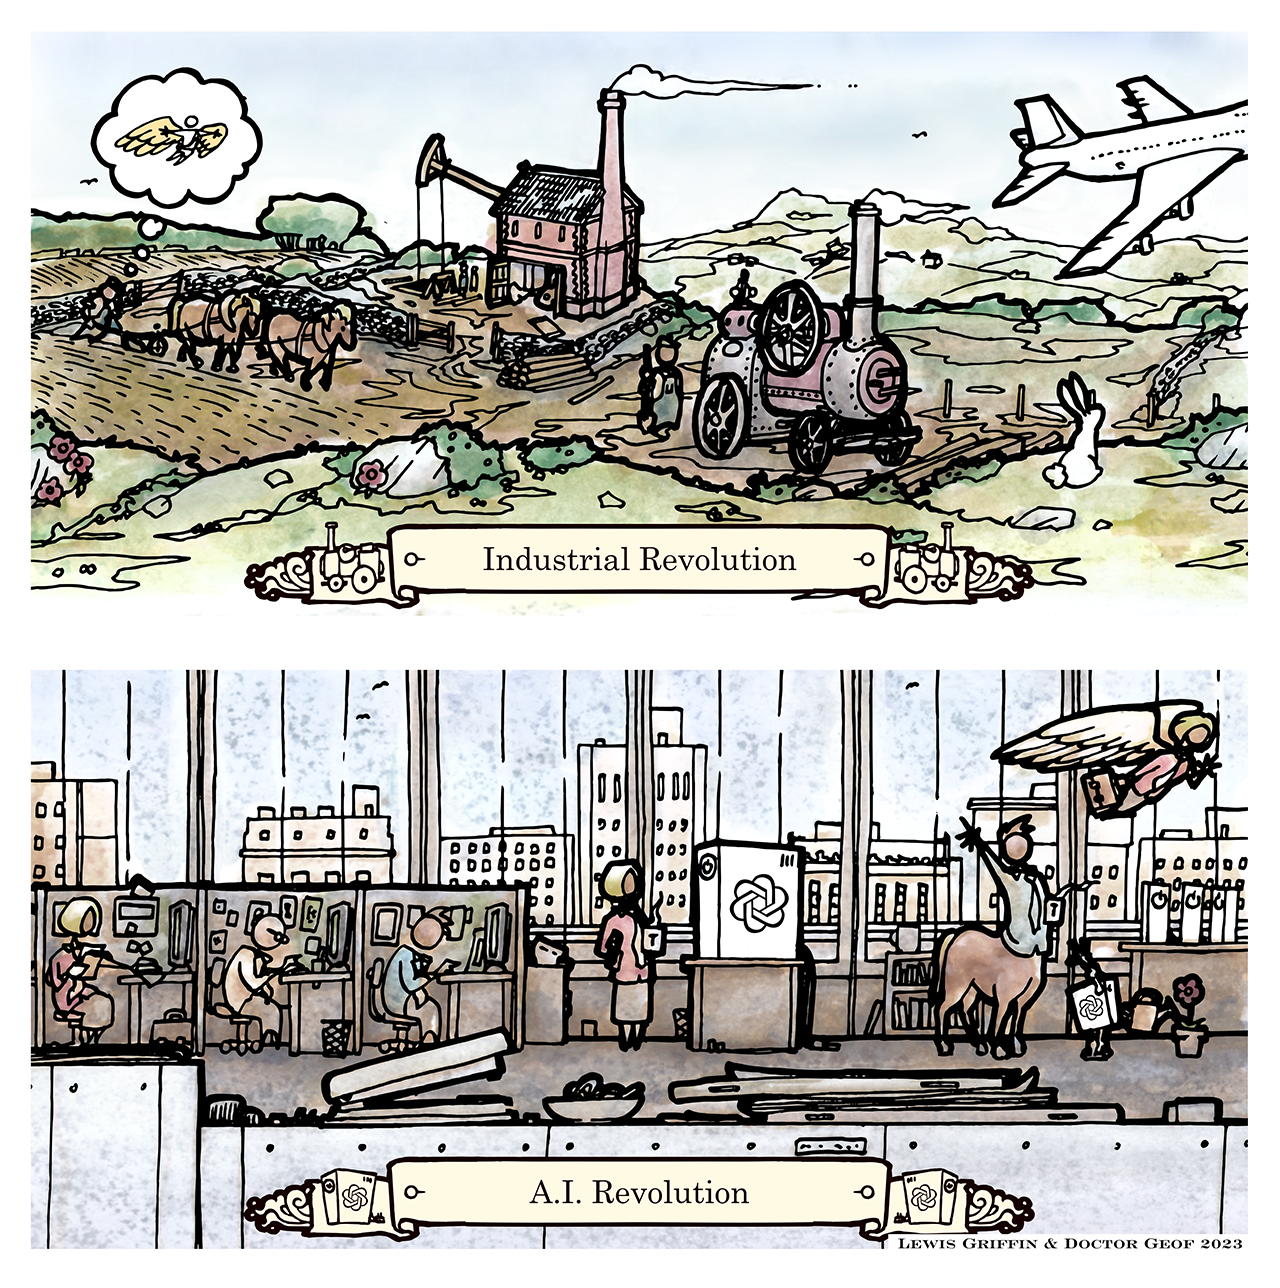 cartoon comparing the industrial revolution's effect on agriculture and manufacturing with AI's effects on white collar and knowledge work